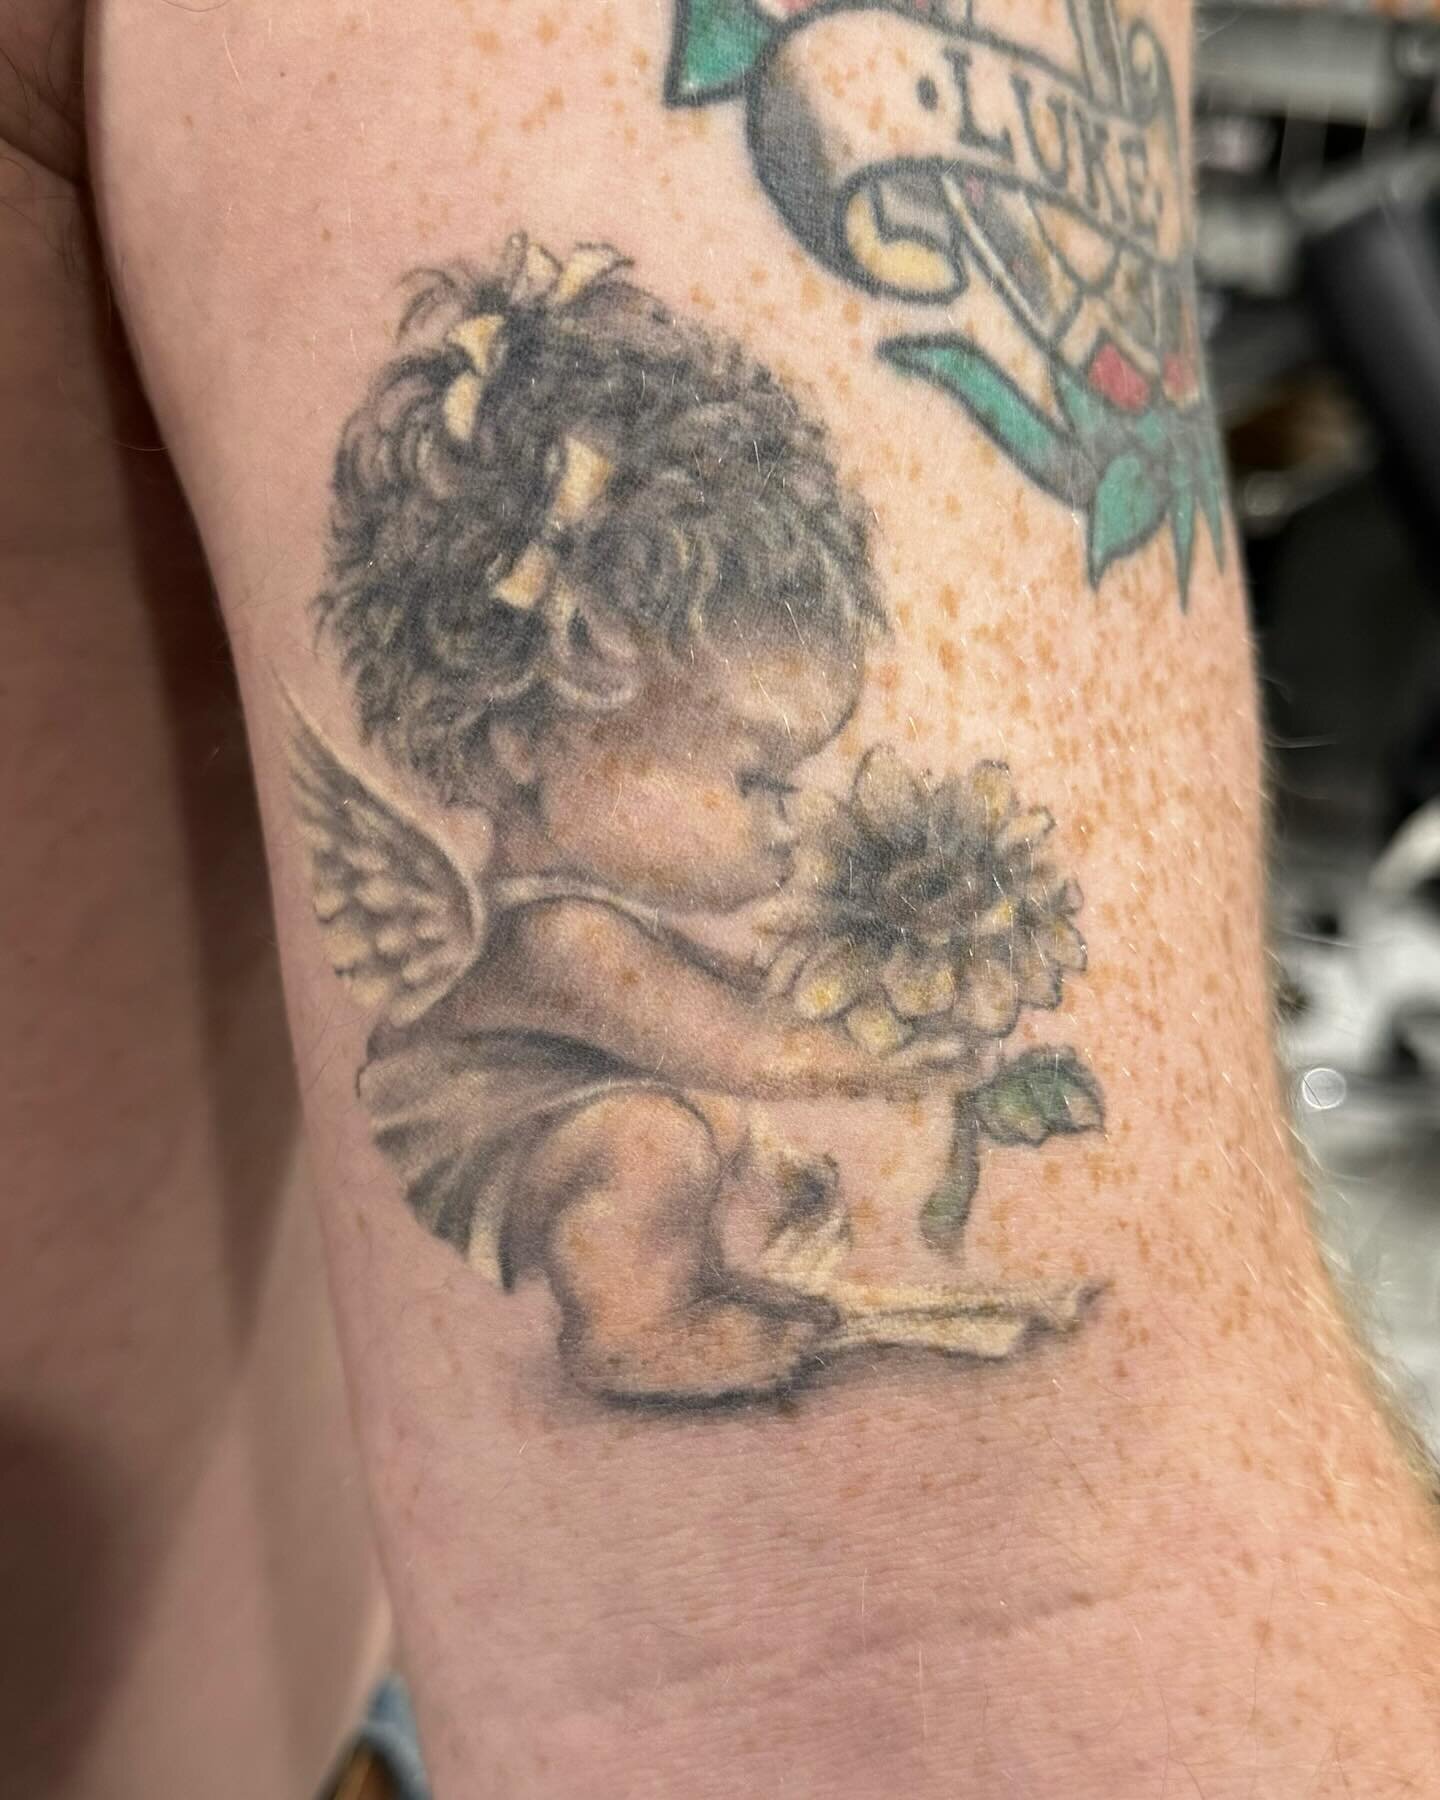 got some healed shots of this lil angel! 👼🏻 just about 2 years healed ✨
.
.
.
.
.
.
.
.
#tattoo #healedtattoo #southjerseytattooartist #newjerseytattooartist @jerseydeviltattooshop